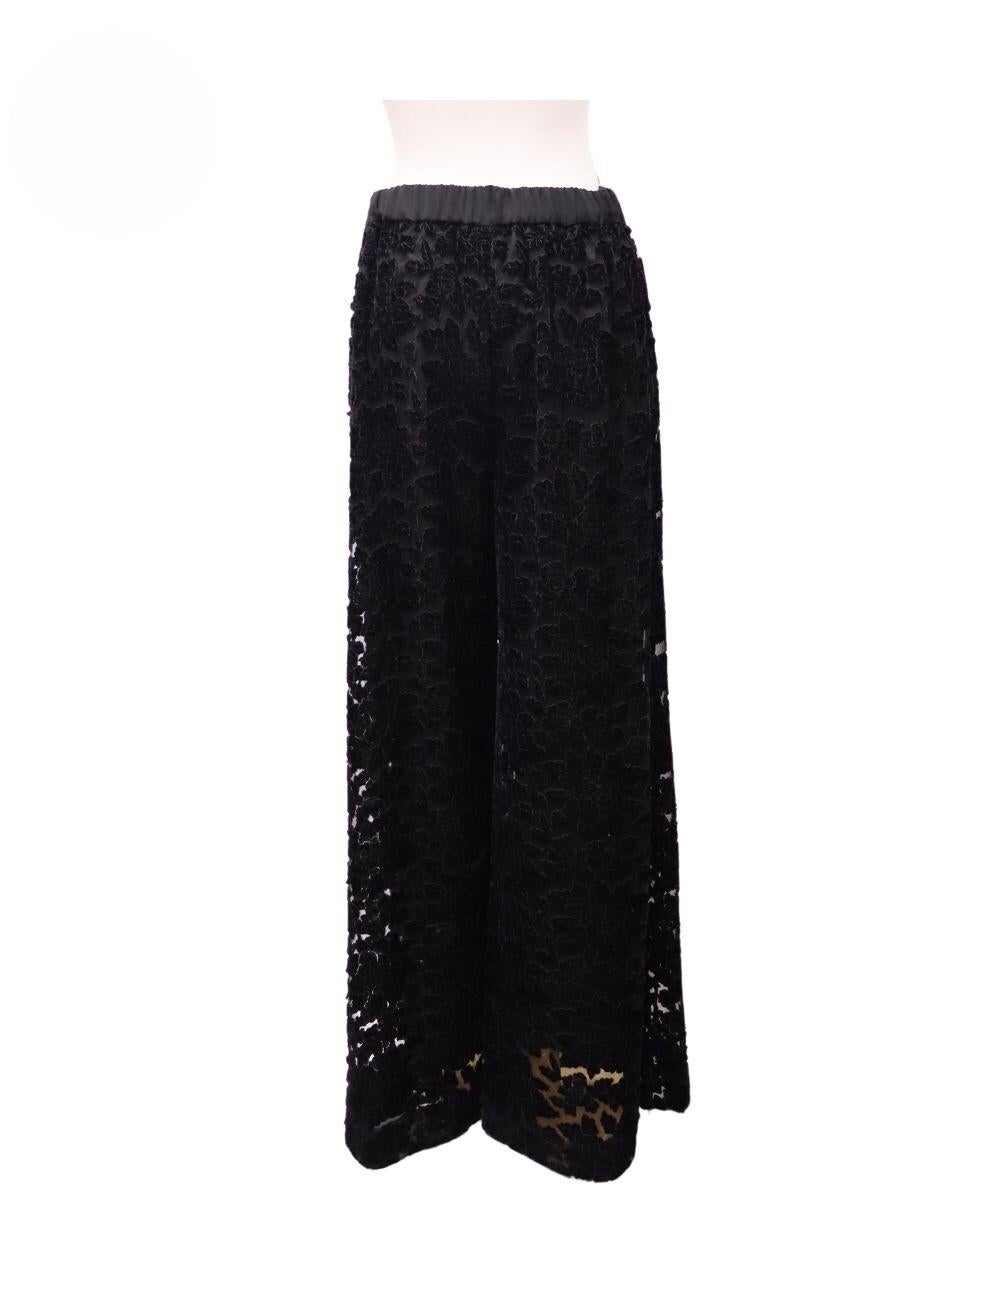 Ted Baker Claudya Wide Leg Pants Size 3 For Sale 1